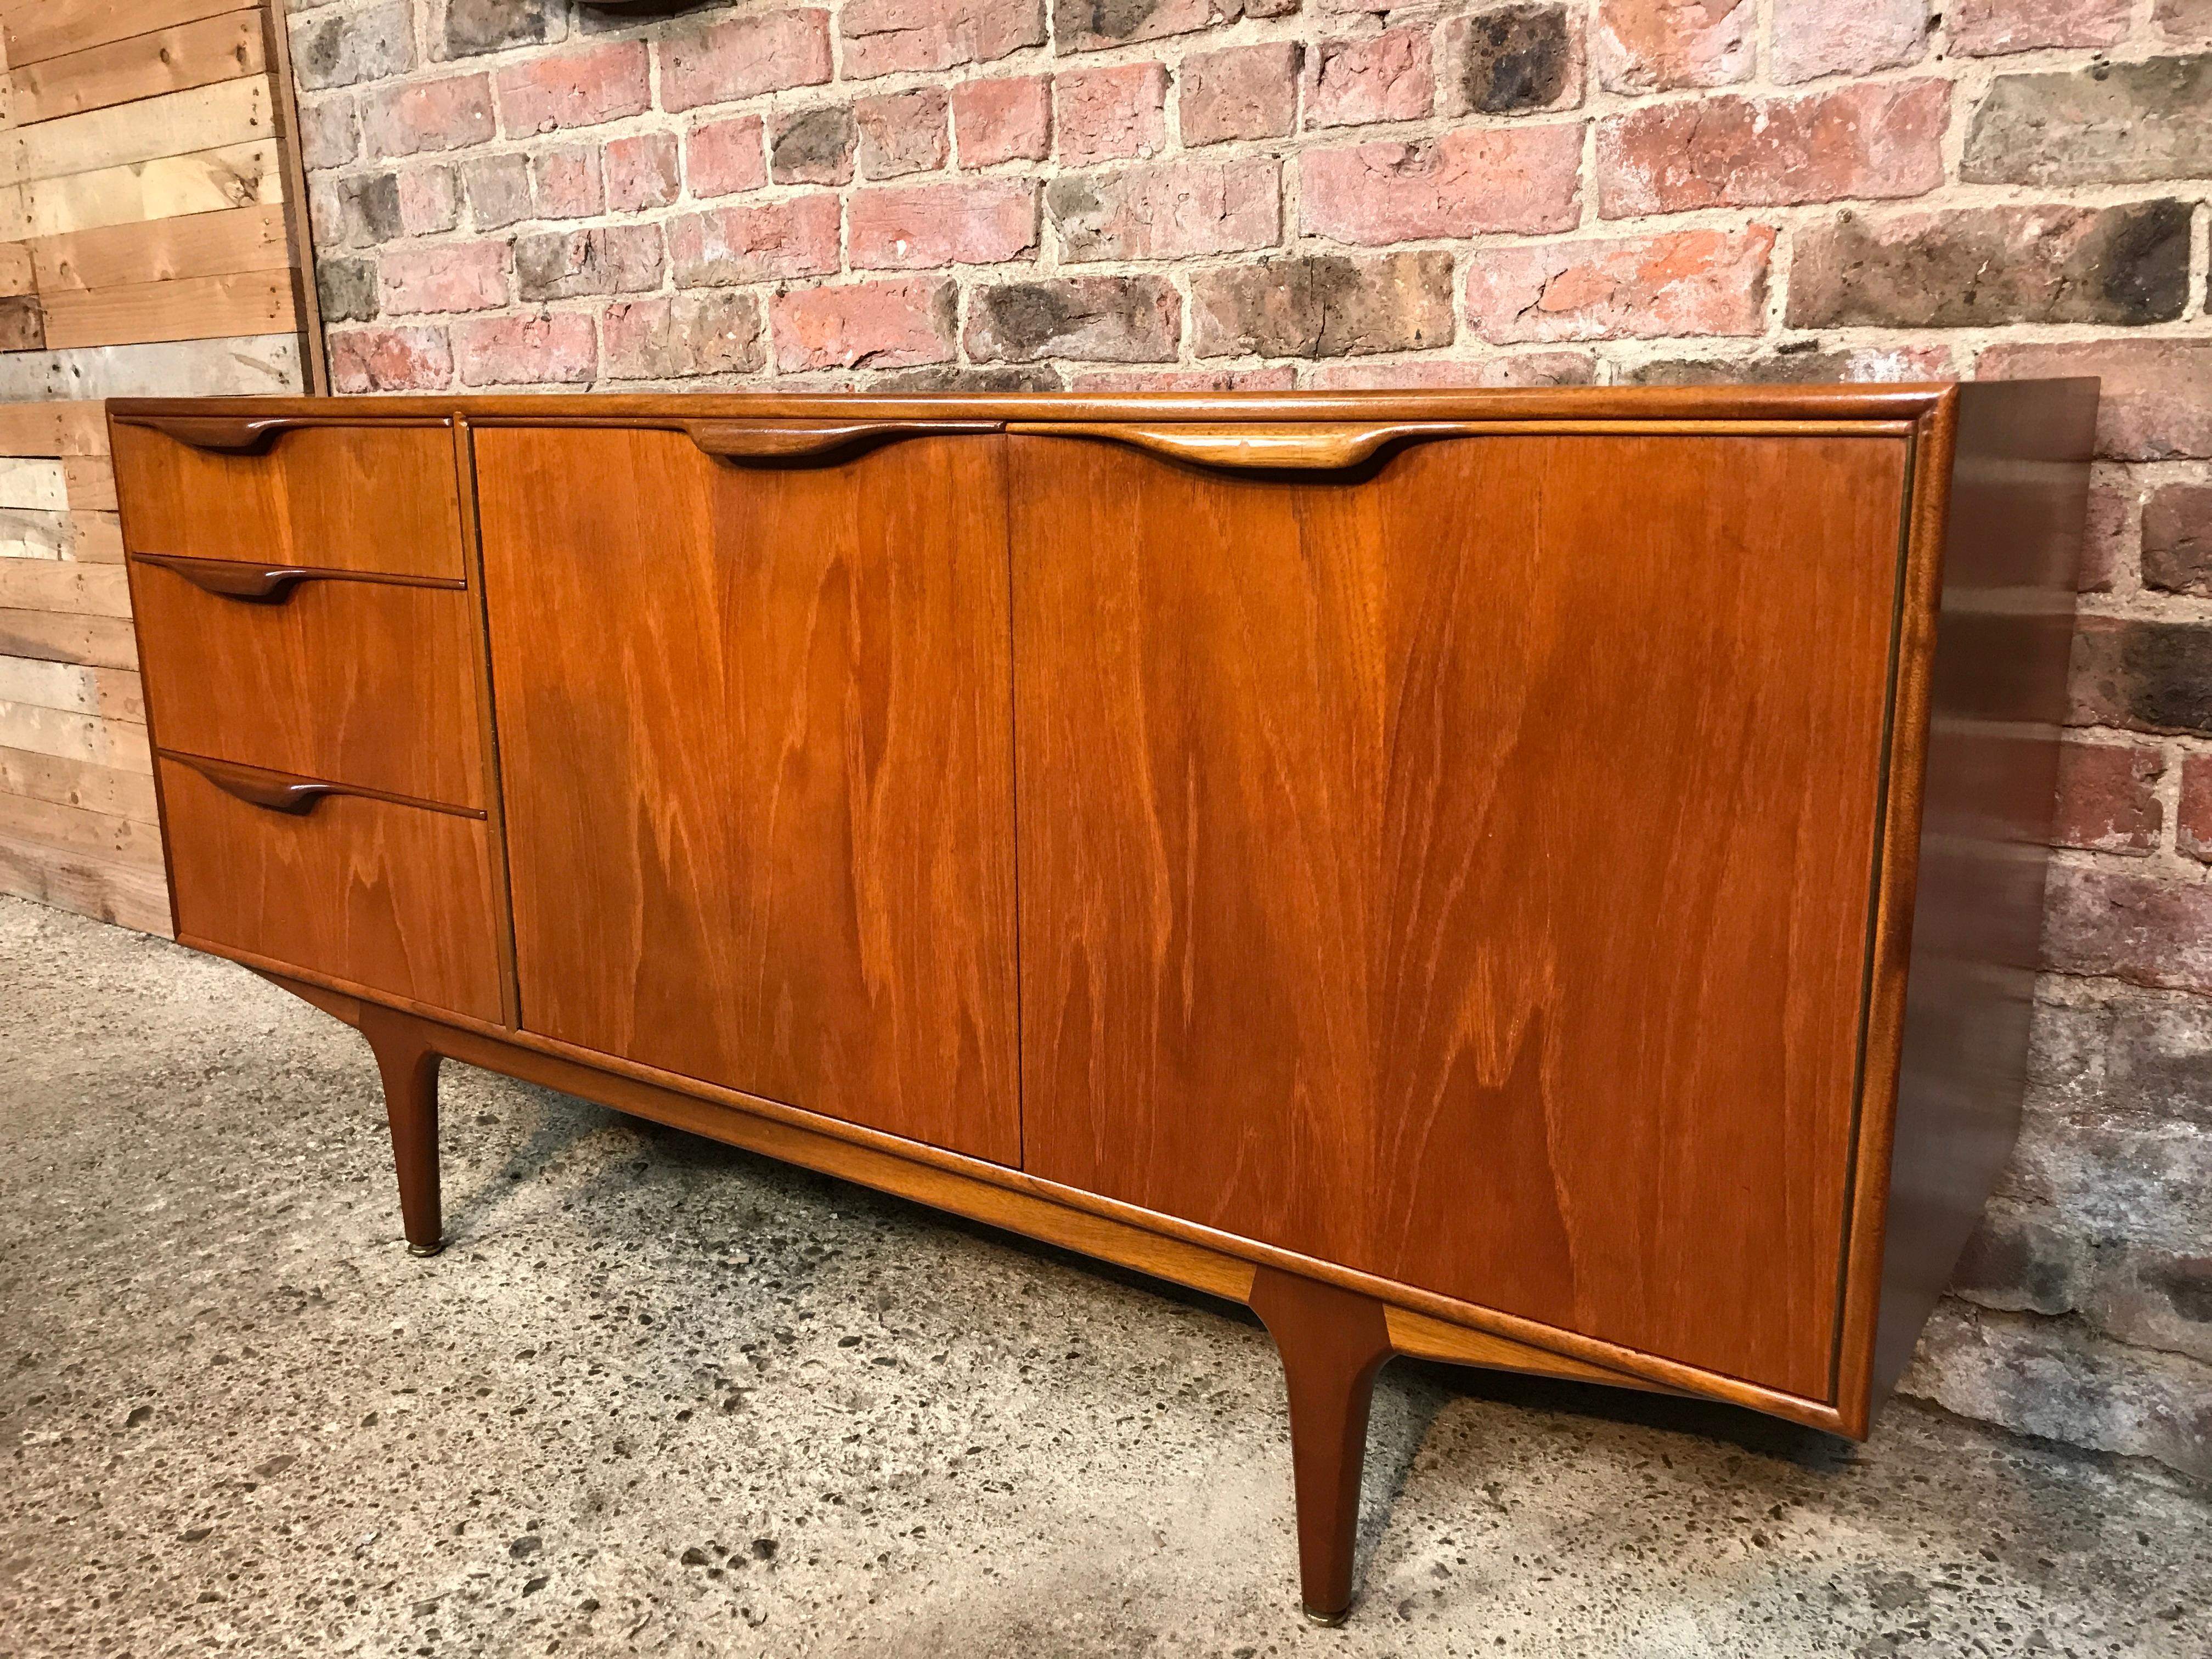 Sought after small sized vintage sideboard or credenza by Tom Robertson for McIntosh, 1960s. It has three drawers and a cupboard space.

Measures: Height 77cm, depth 48cm, width 152cm.